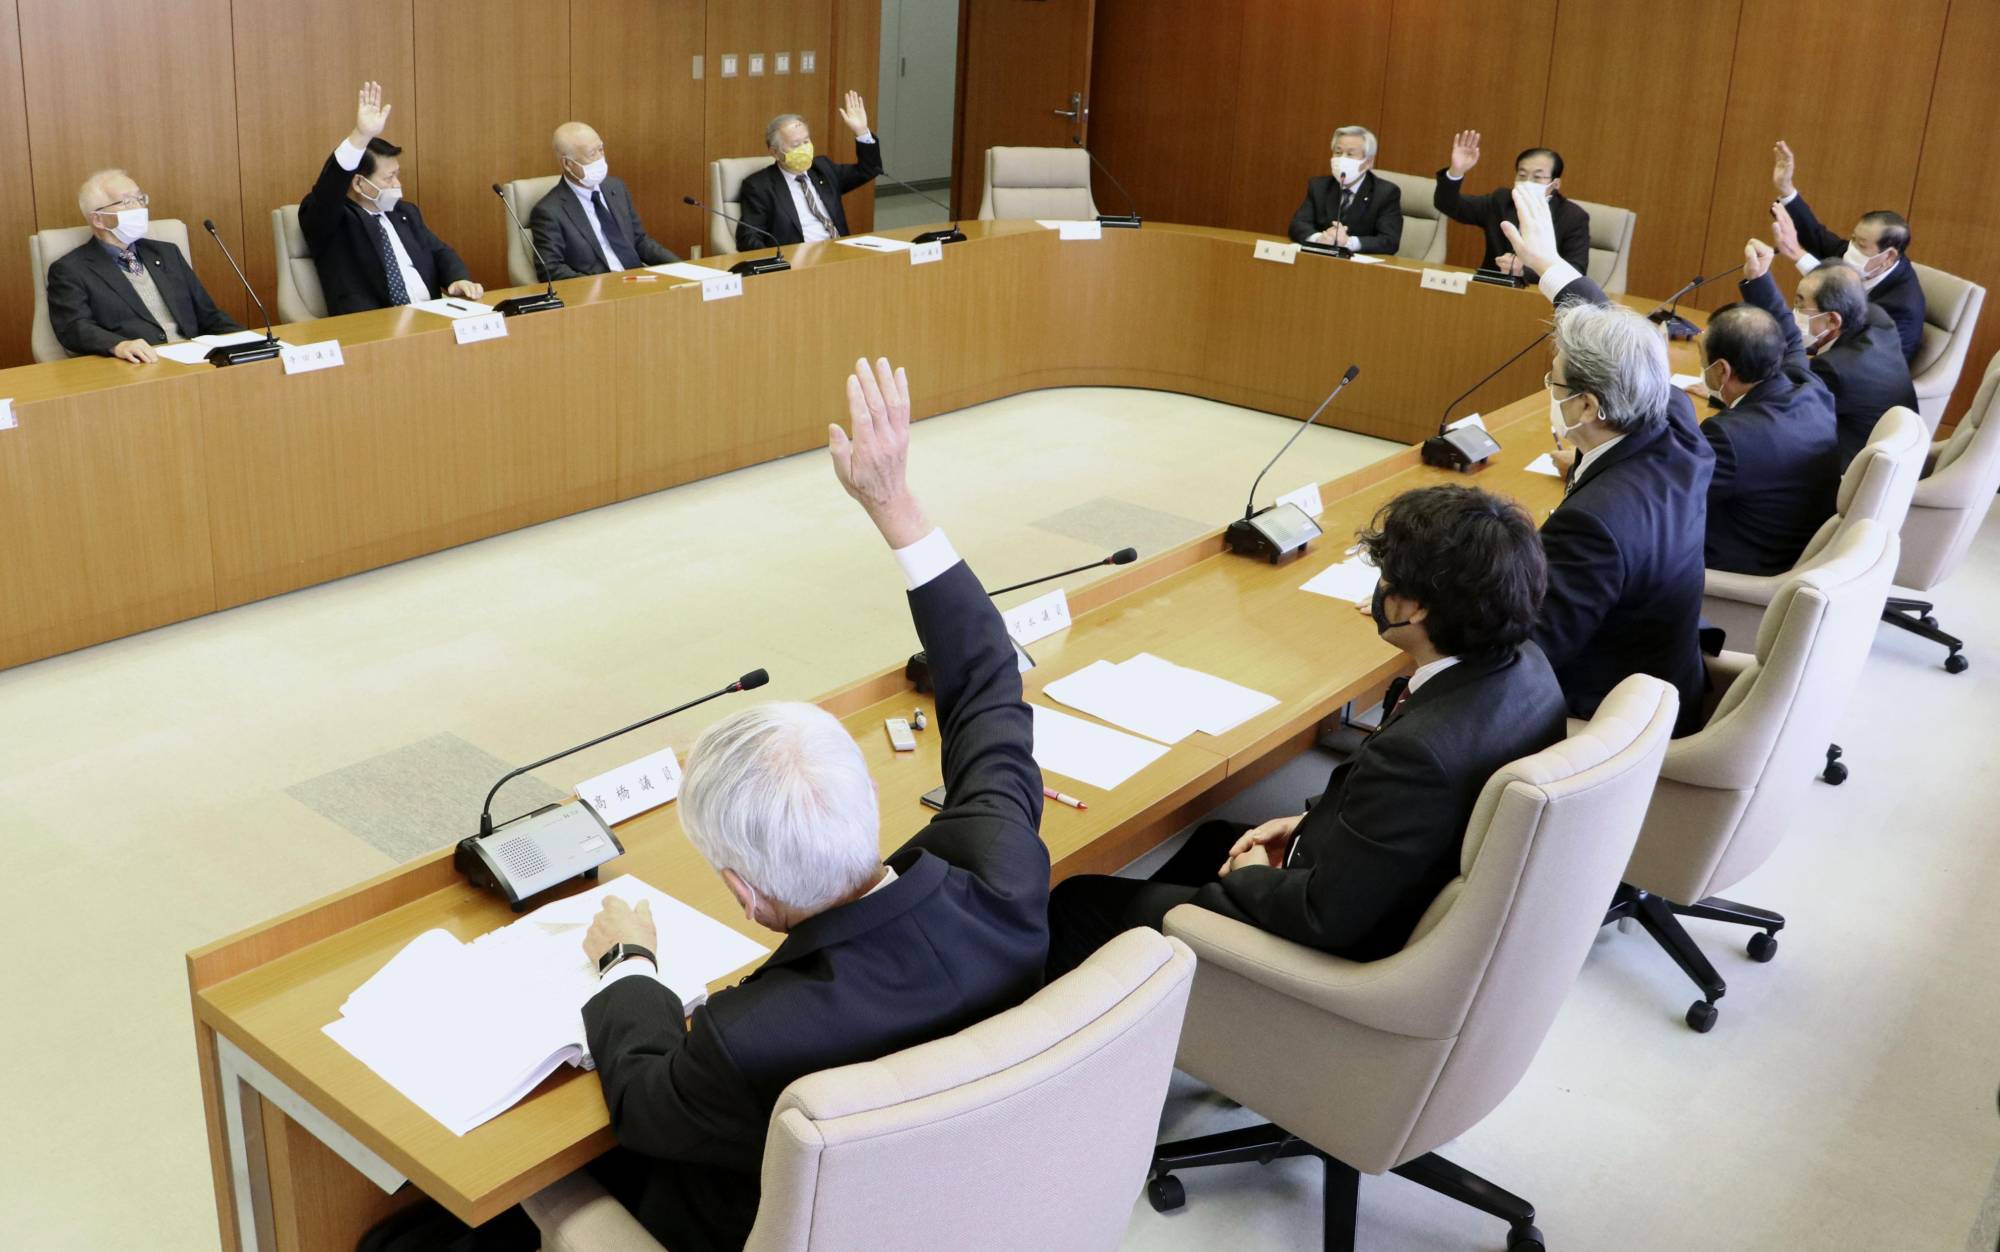 The Mihama Municipal Assembly gives the green light for operations to resume at the Mihama No. 3 nuclear power plant in Fukui Prefecture on Dec. 18, 2020. | KYODO